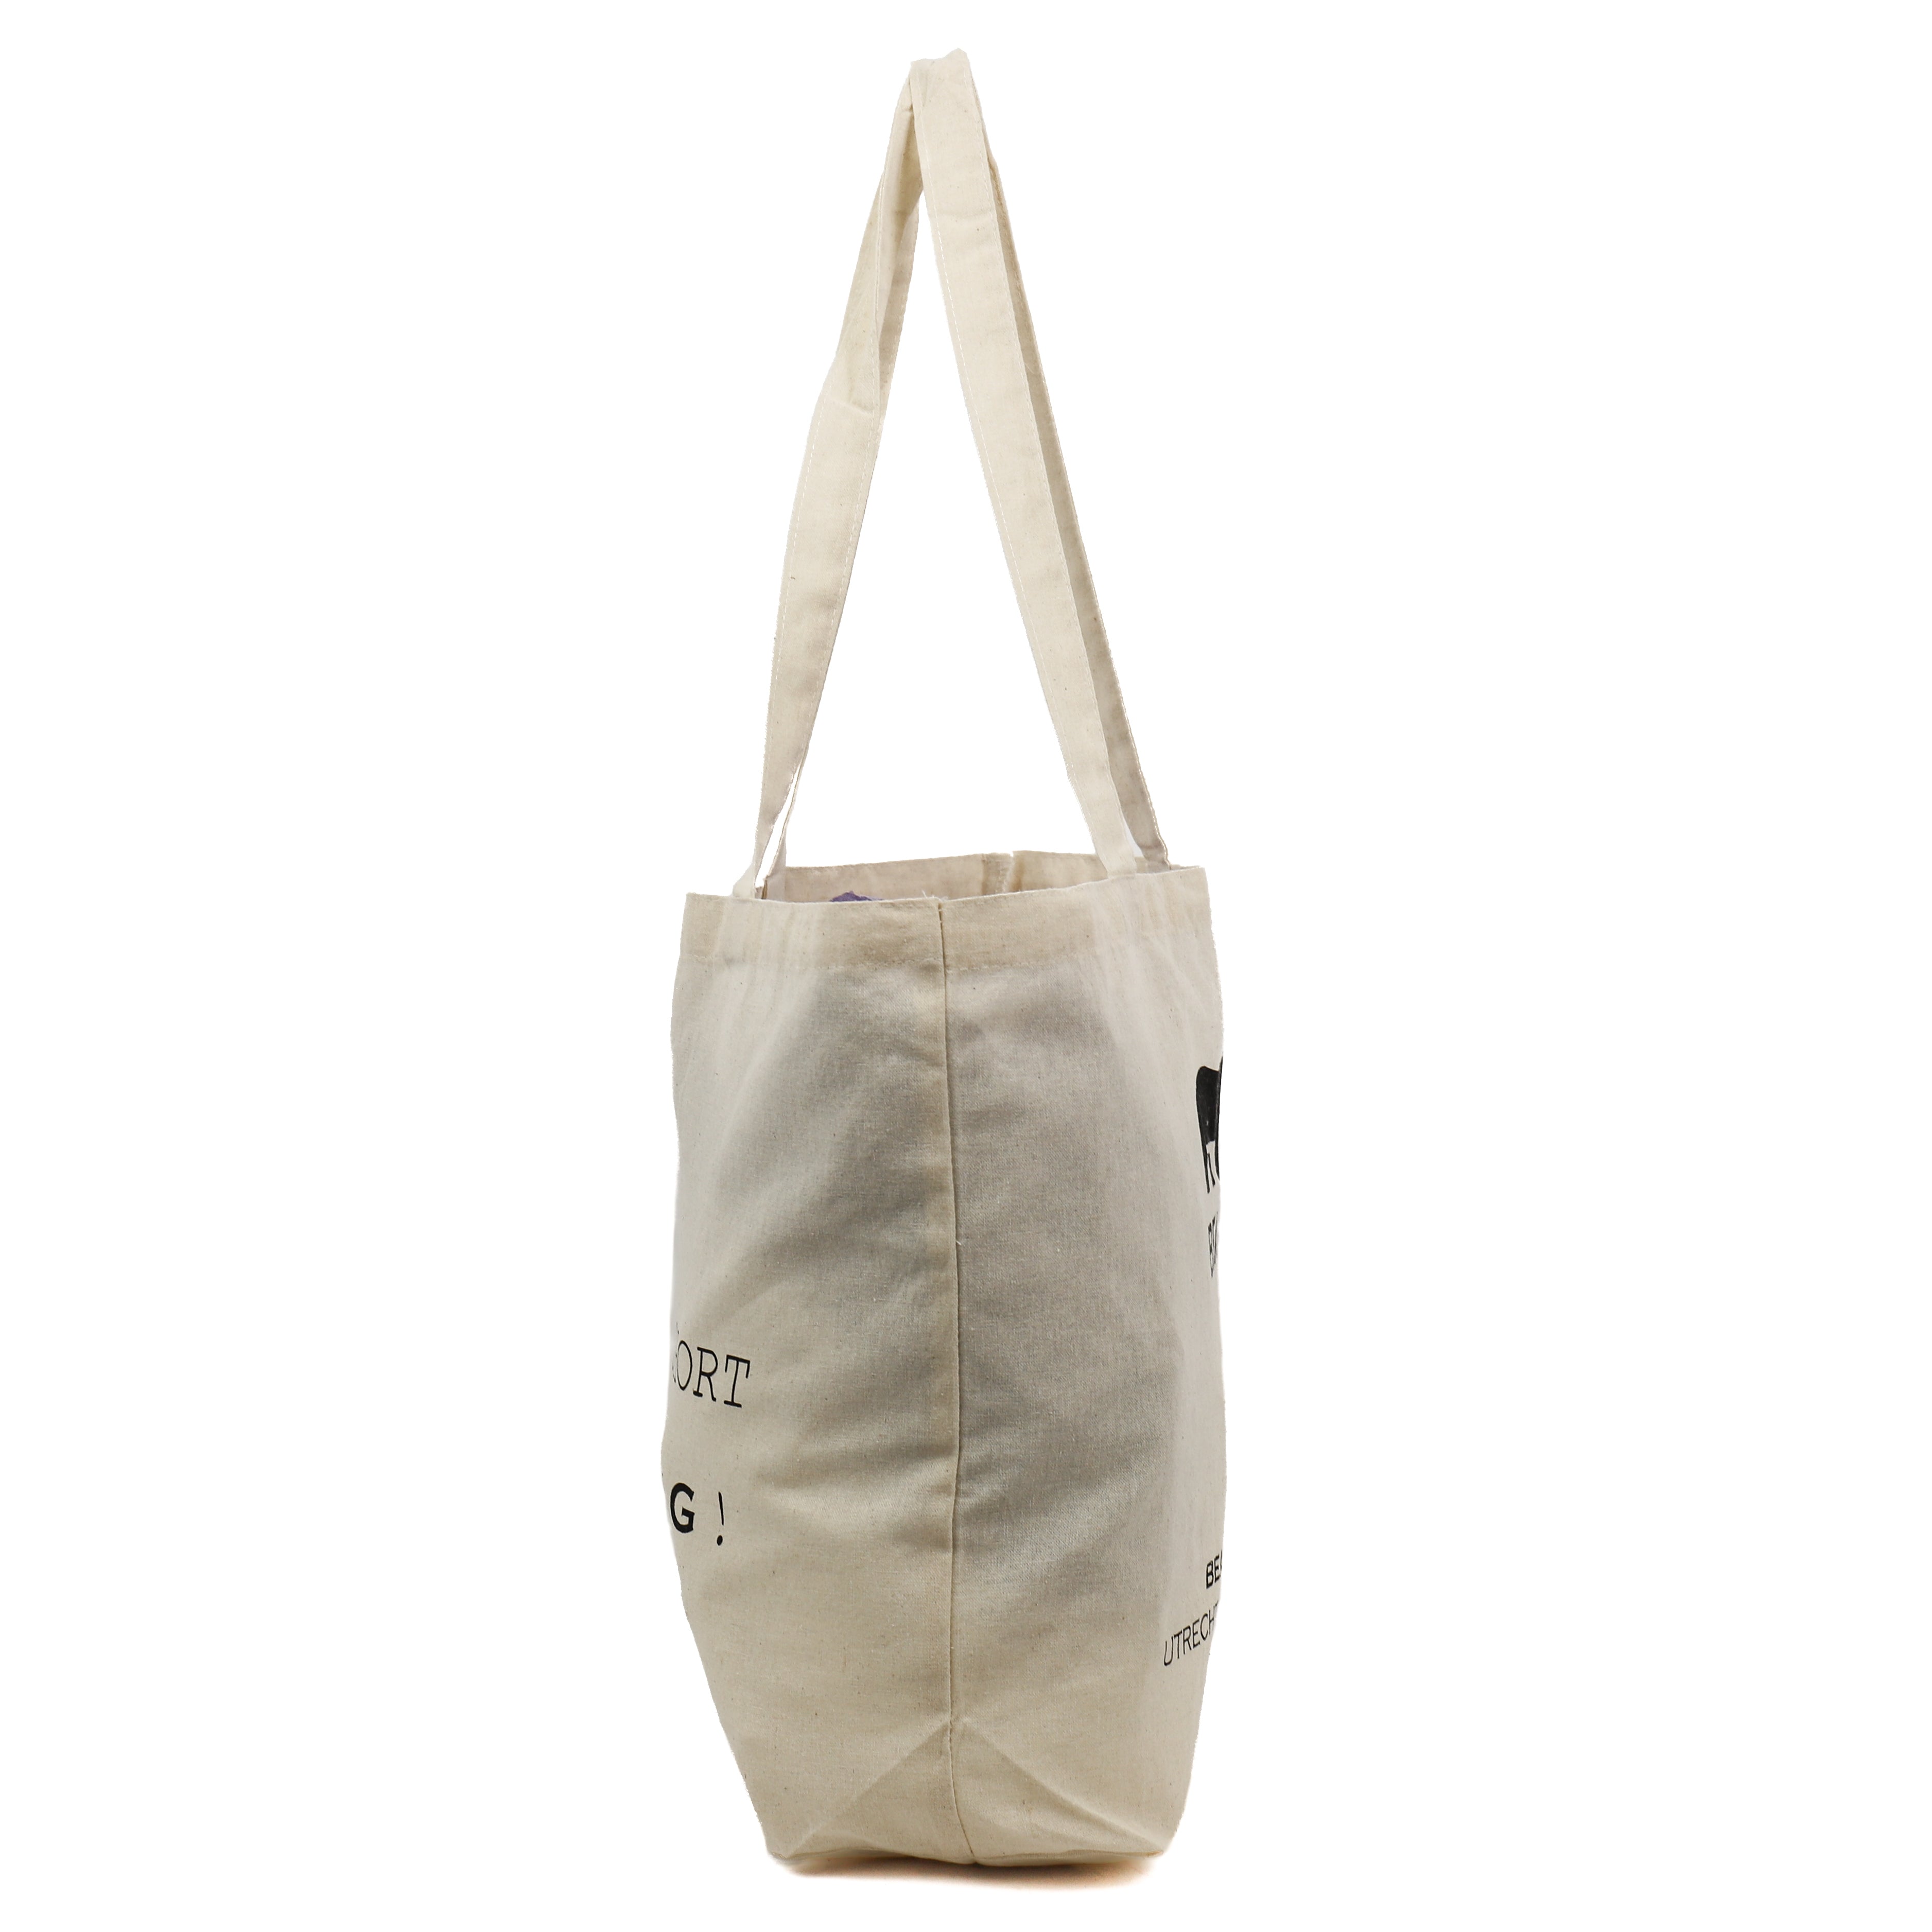 Cotton tote bag 'Life is short, buy the bag'